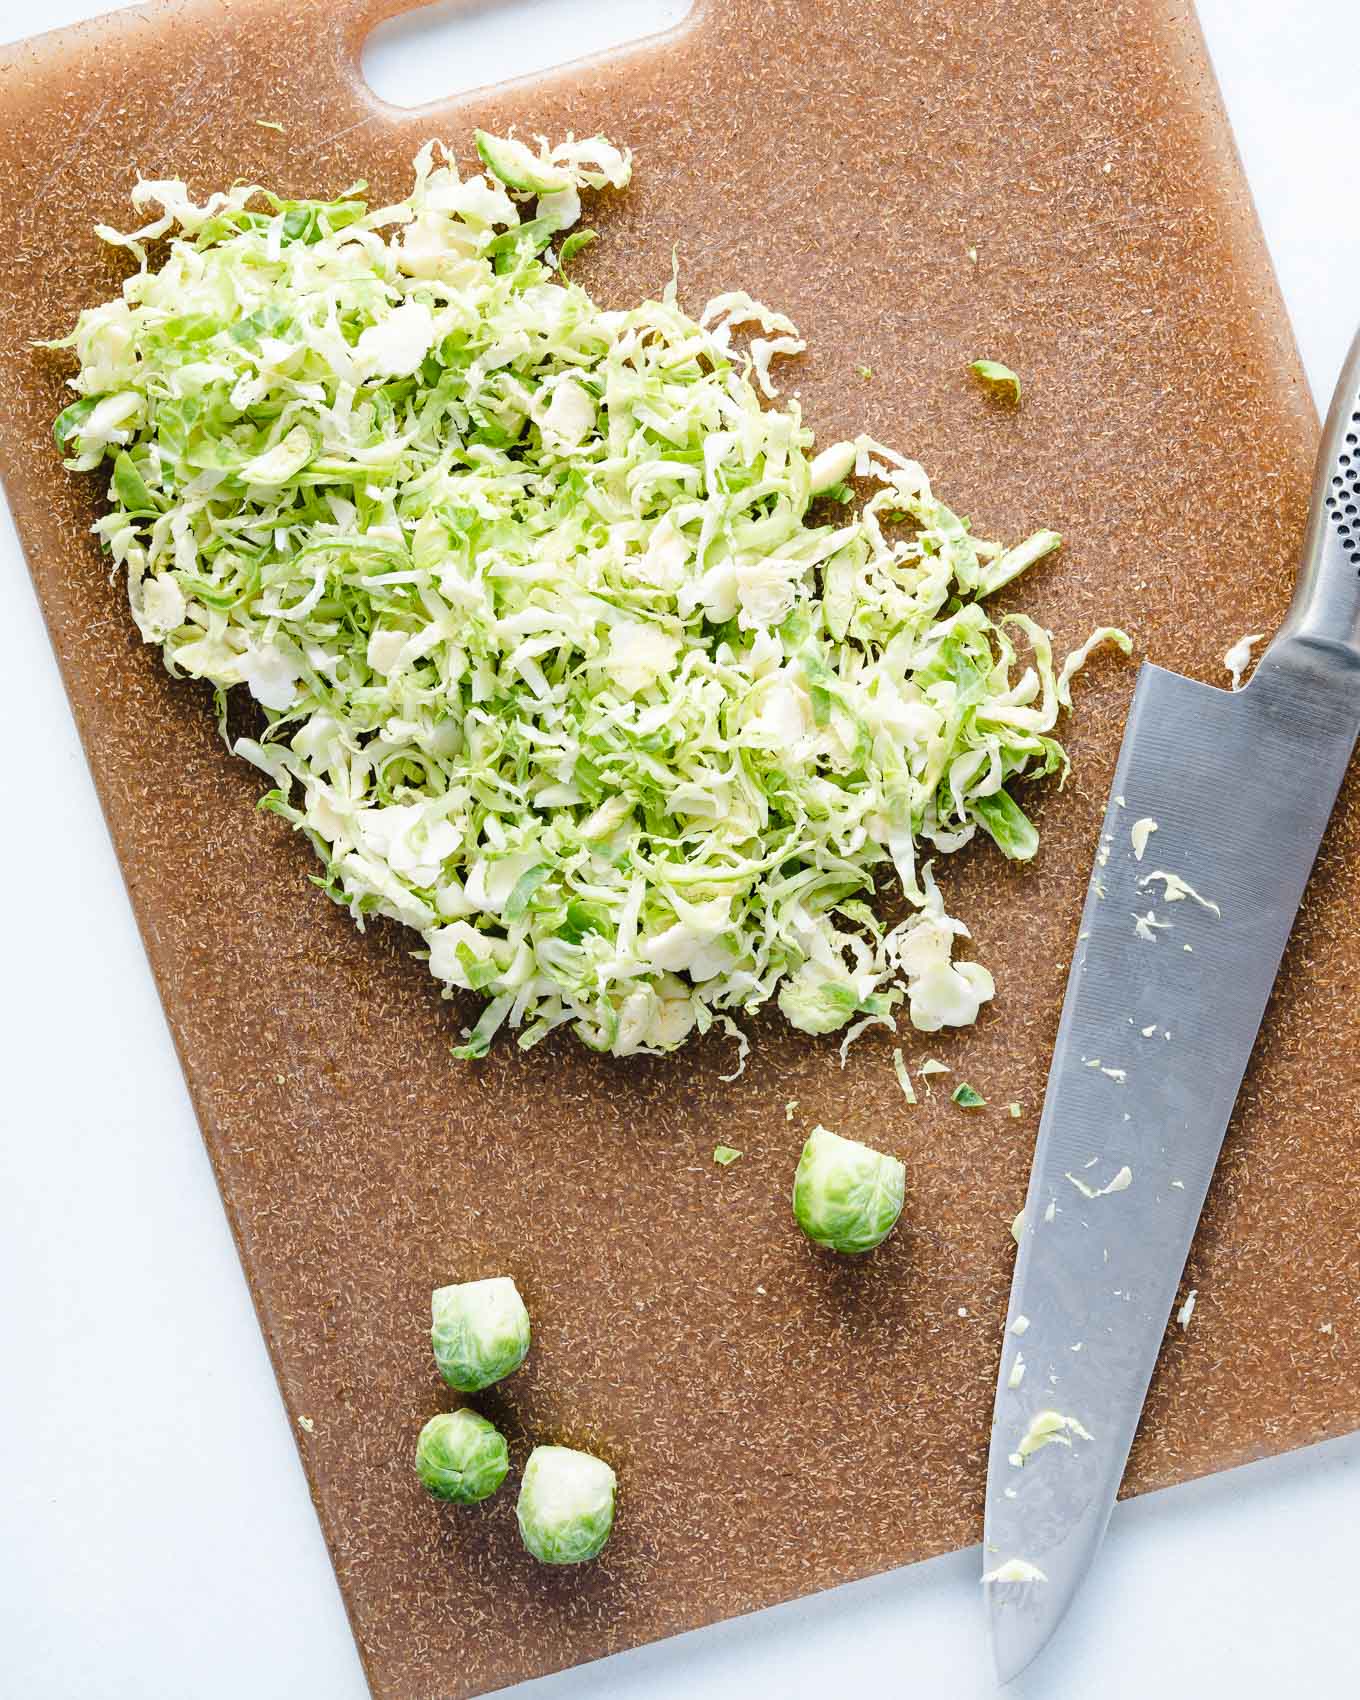 raw brussels sprouts being chopped by a sharp knife on a brown cutting board